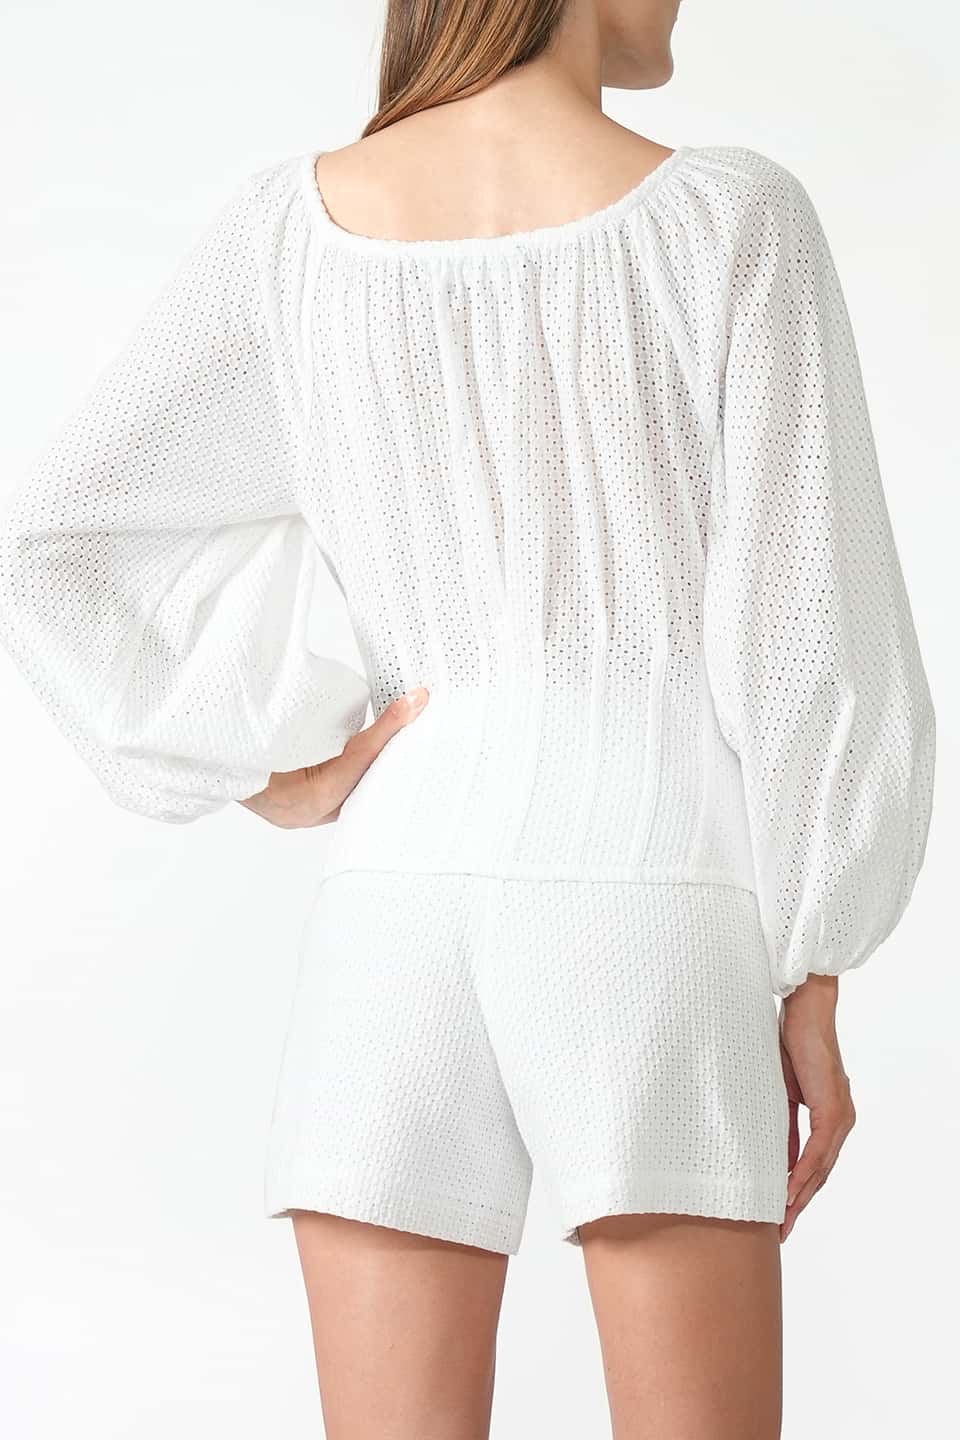 Designer White Women blouses, shop online with free delivery in UAE. Product gallery 6